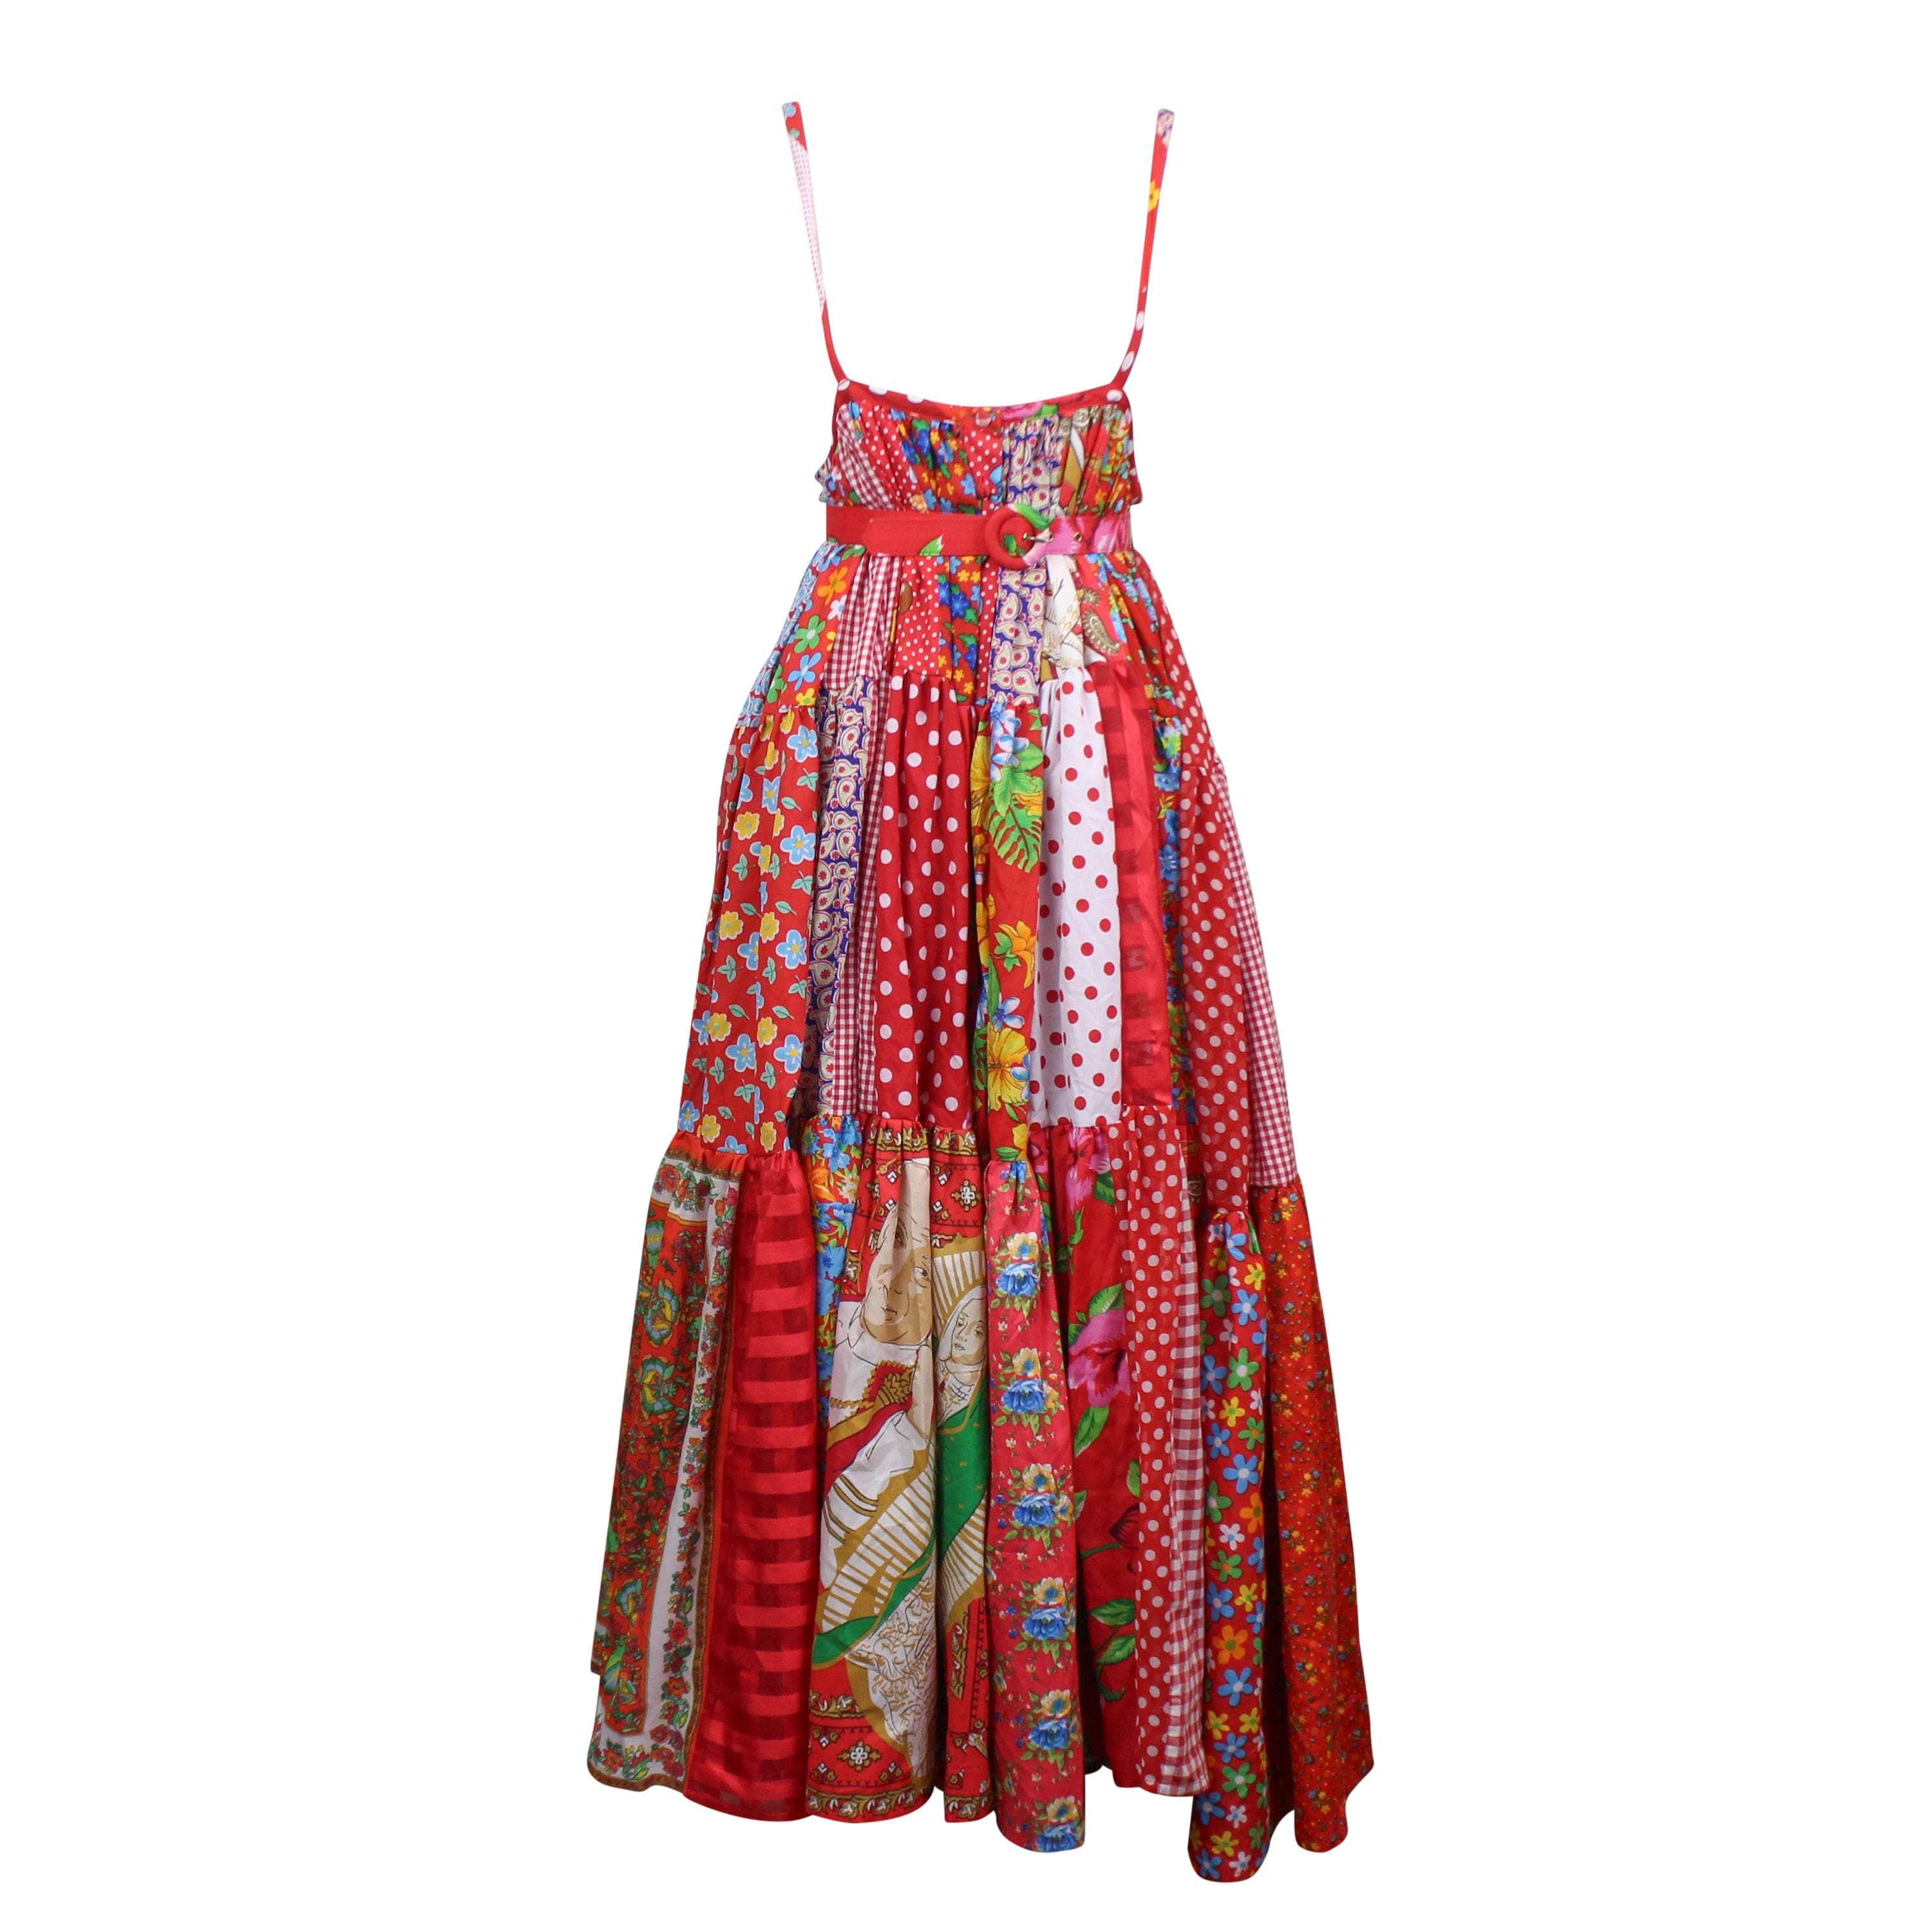 LE JESUS 250-500, channelenable-all, chicmi, couponcollection, le-jesus, main-clothing, shop375, size-4, womens-day-dresses 4 RED PATCHWORK PRAIRIE TENT DRESS 95-LEJ-0001/4 95-LEJ-0001/4